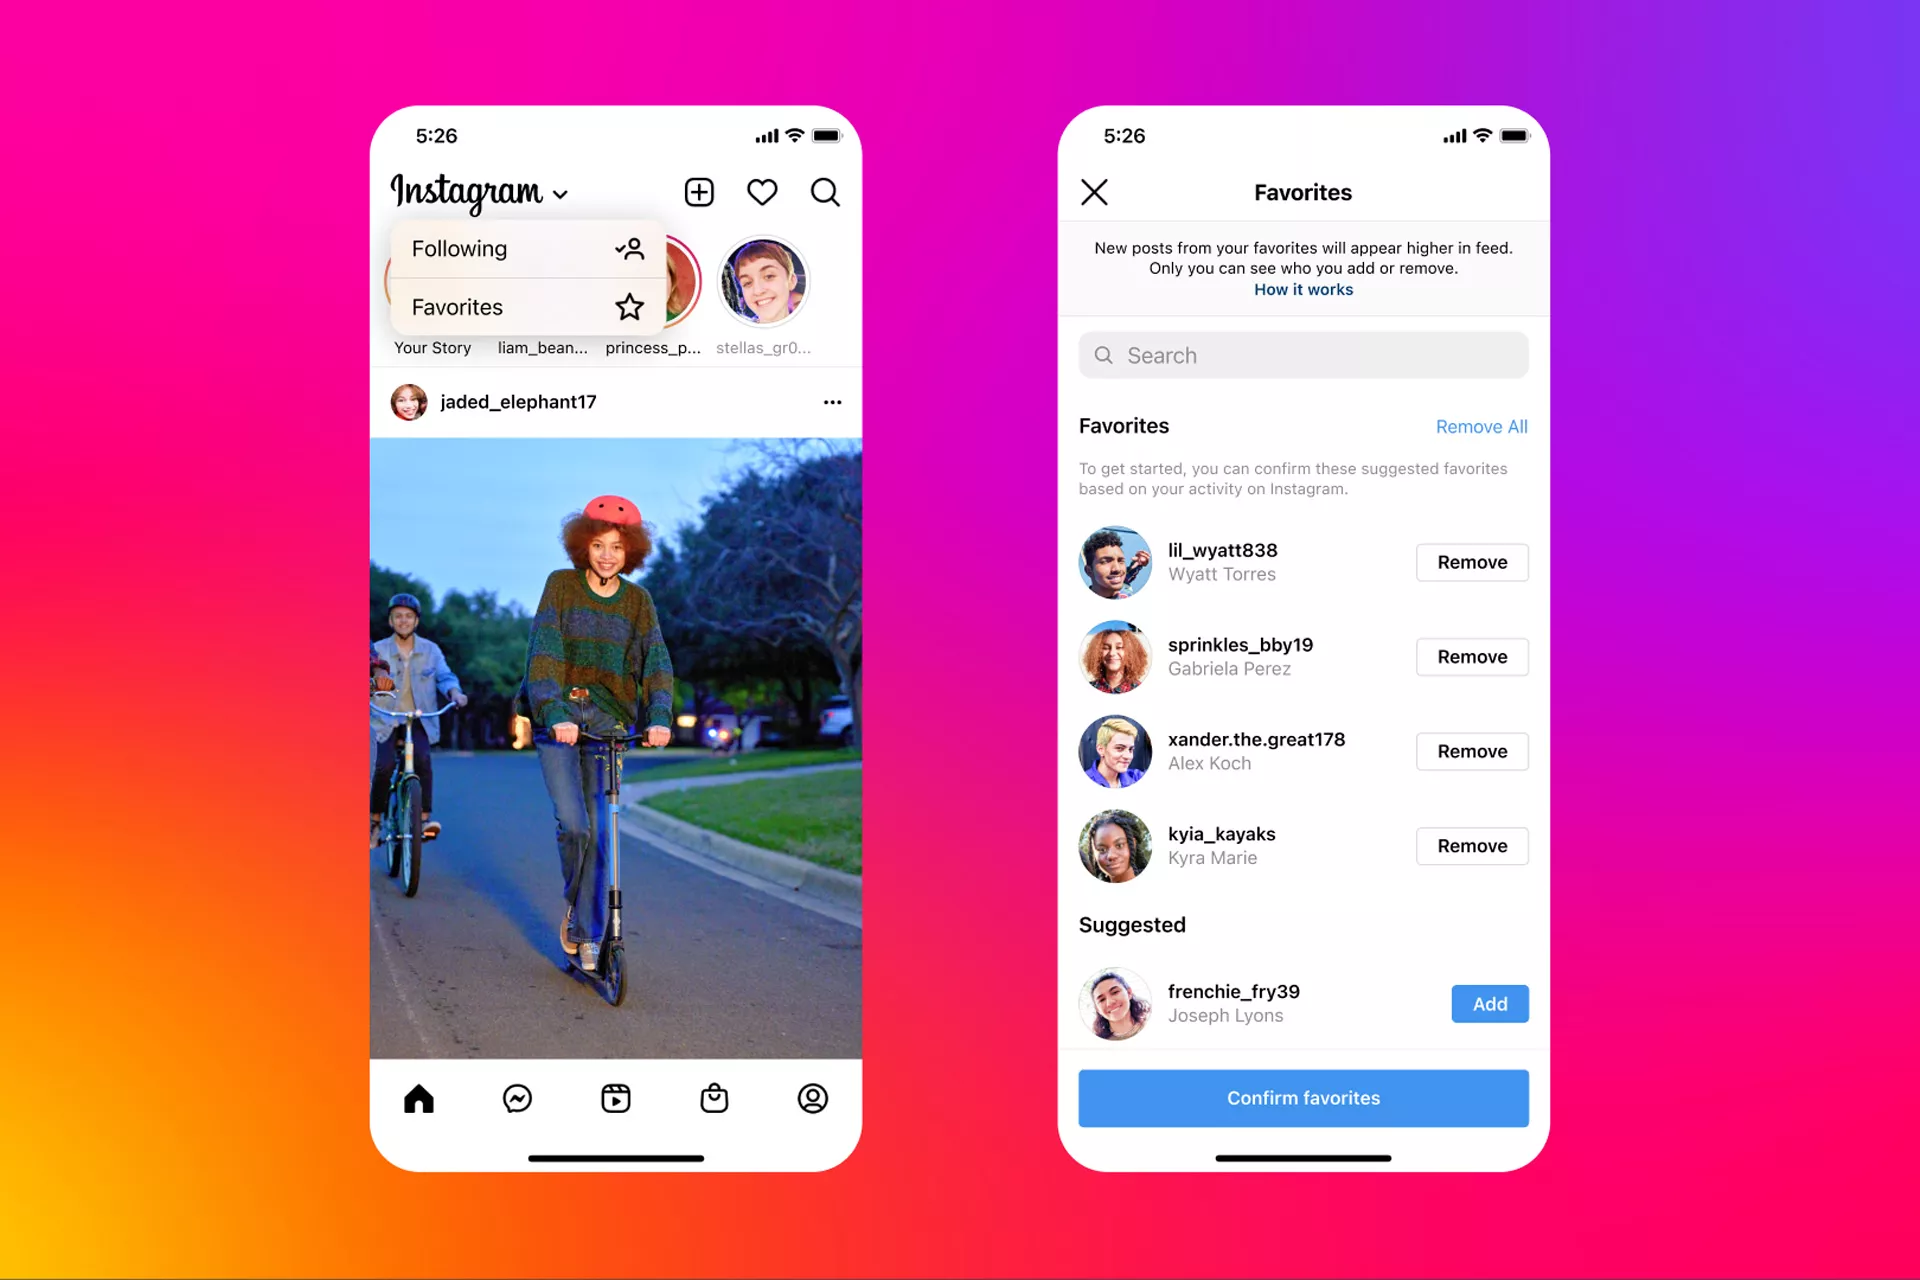 Instagram home page hosted two modes, Following and Favorites